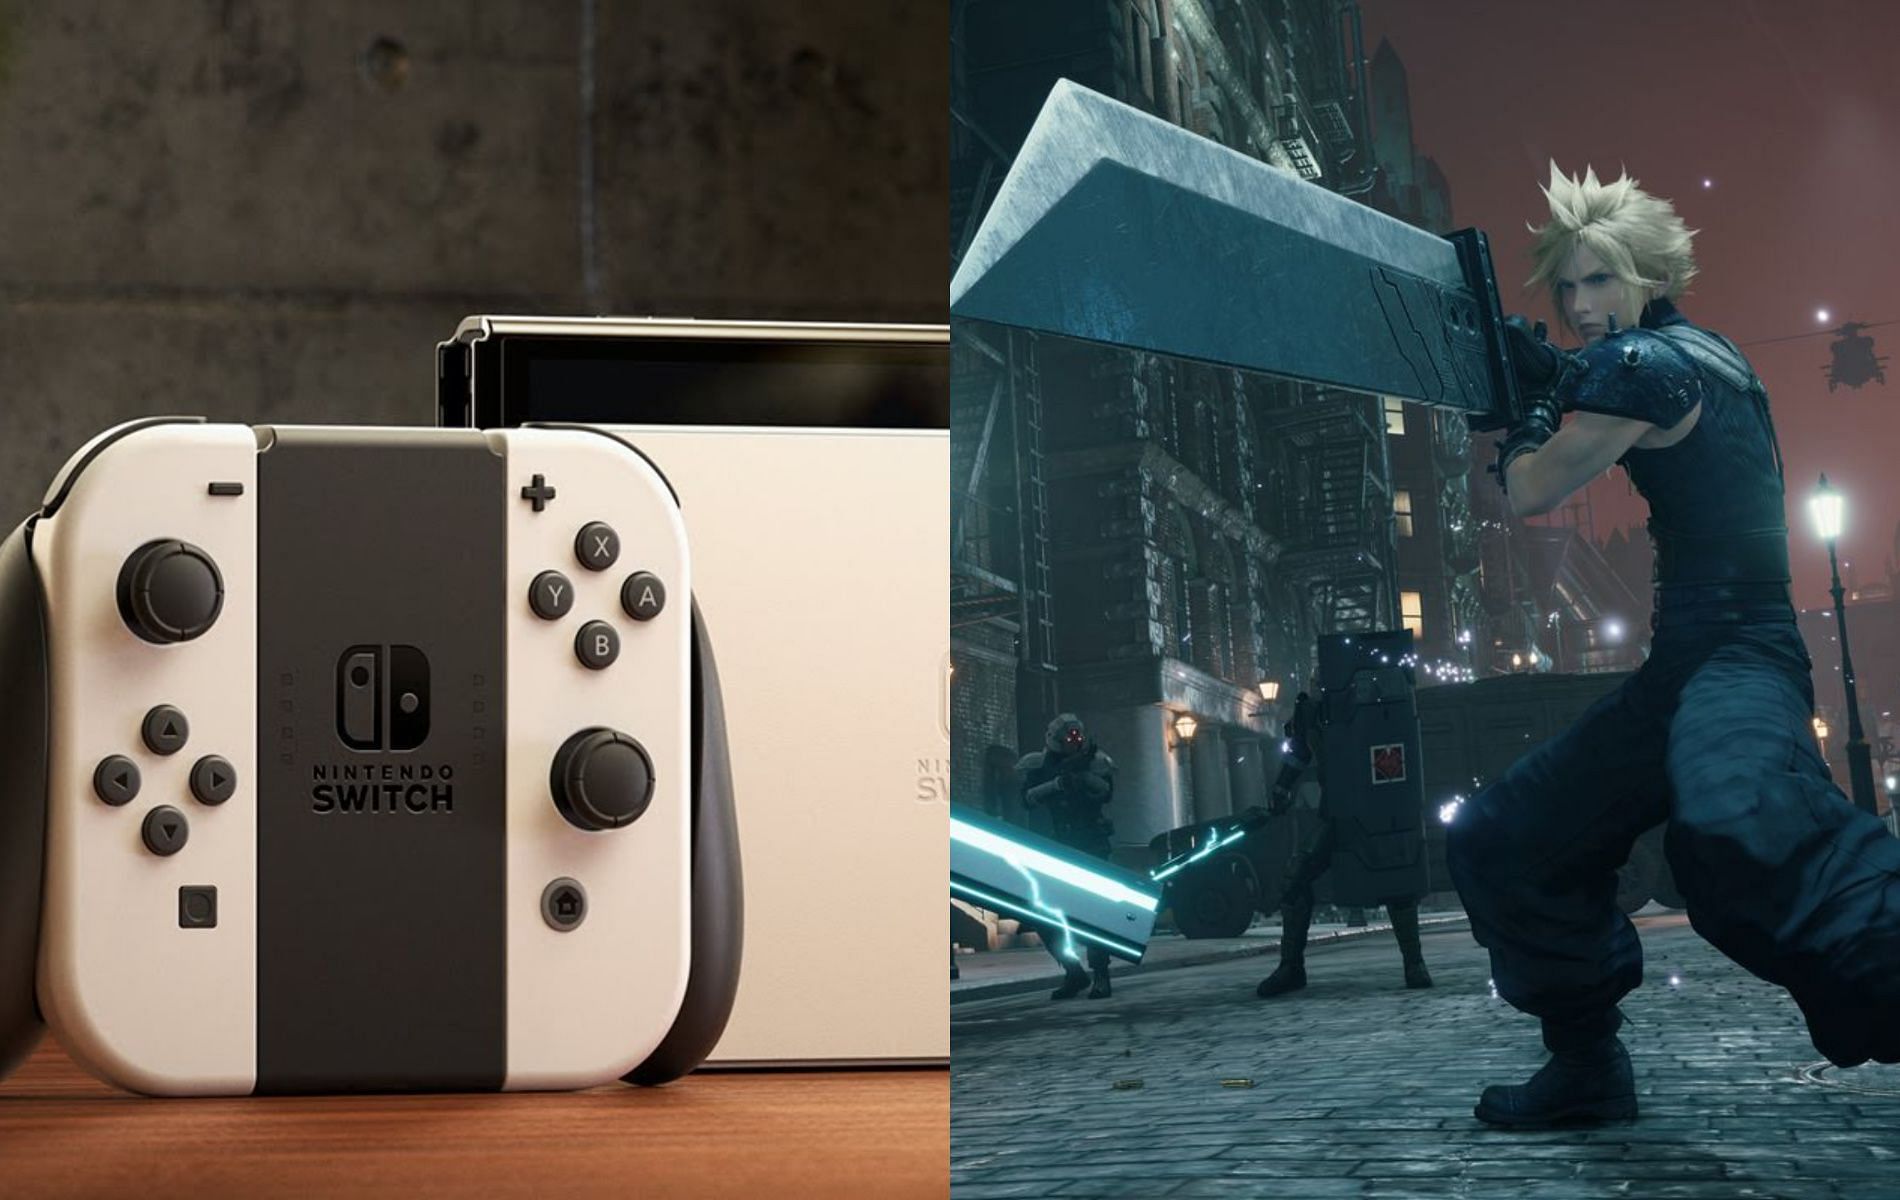 Square Enix on Nintendo Switch: Past, Present, and Future